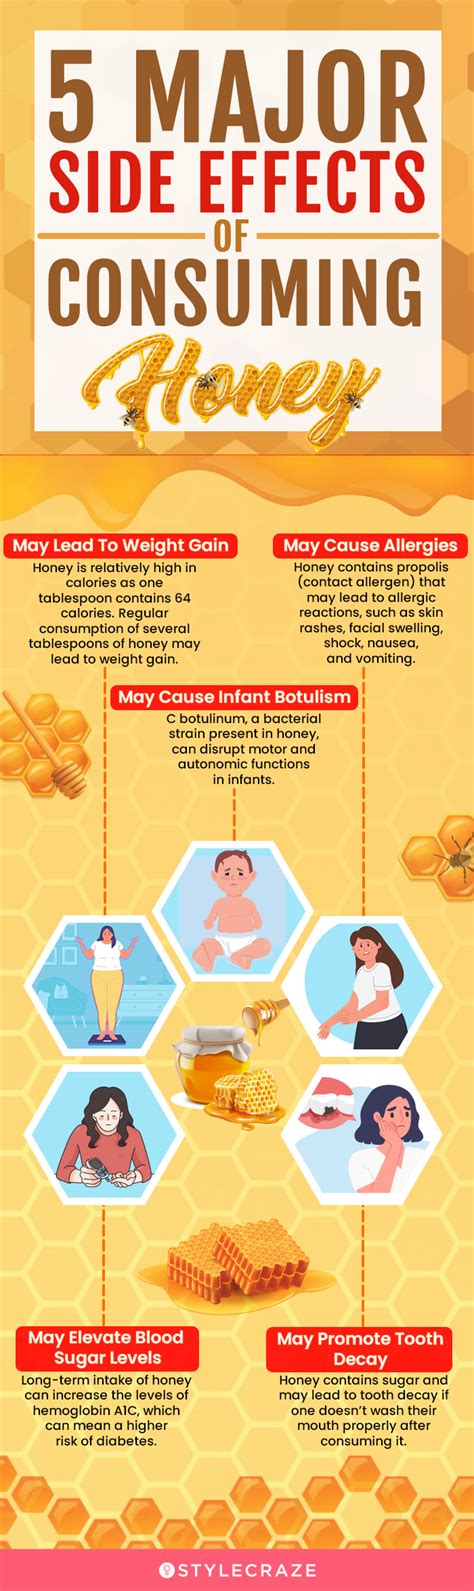 What are the side effects of Sidr honey?